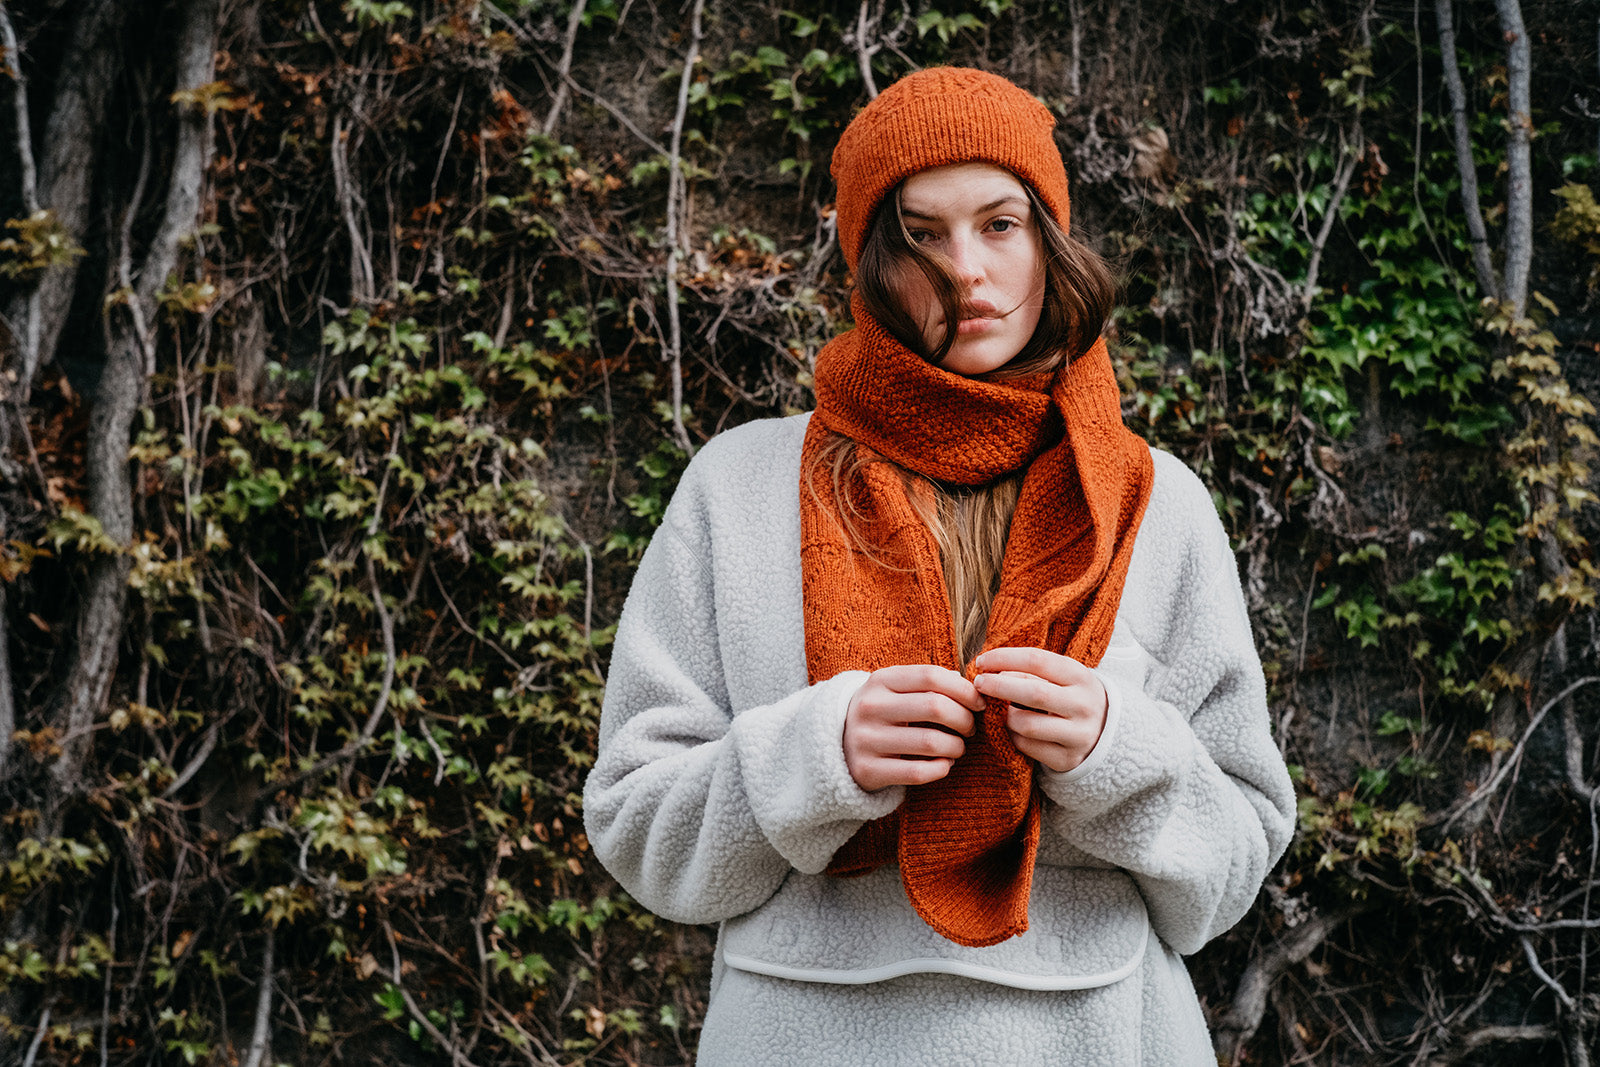 A British female model wearing Snow Peak Apparel AW21 Thermal fleece pullover and alpaca knit hat and scarf